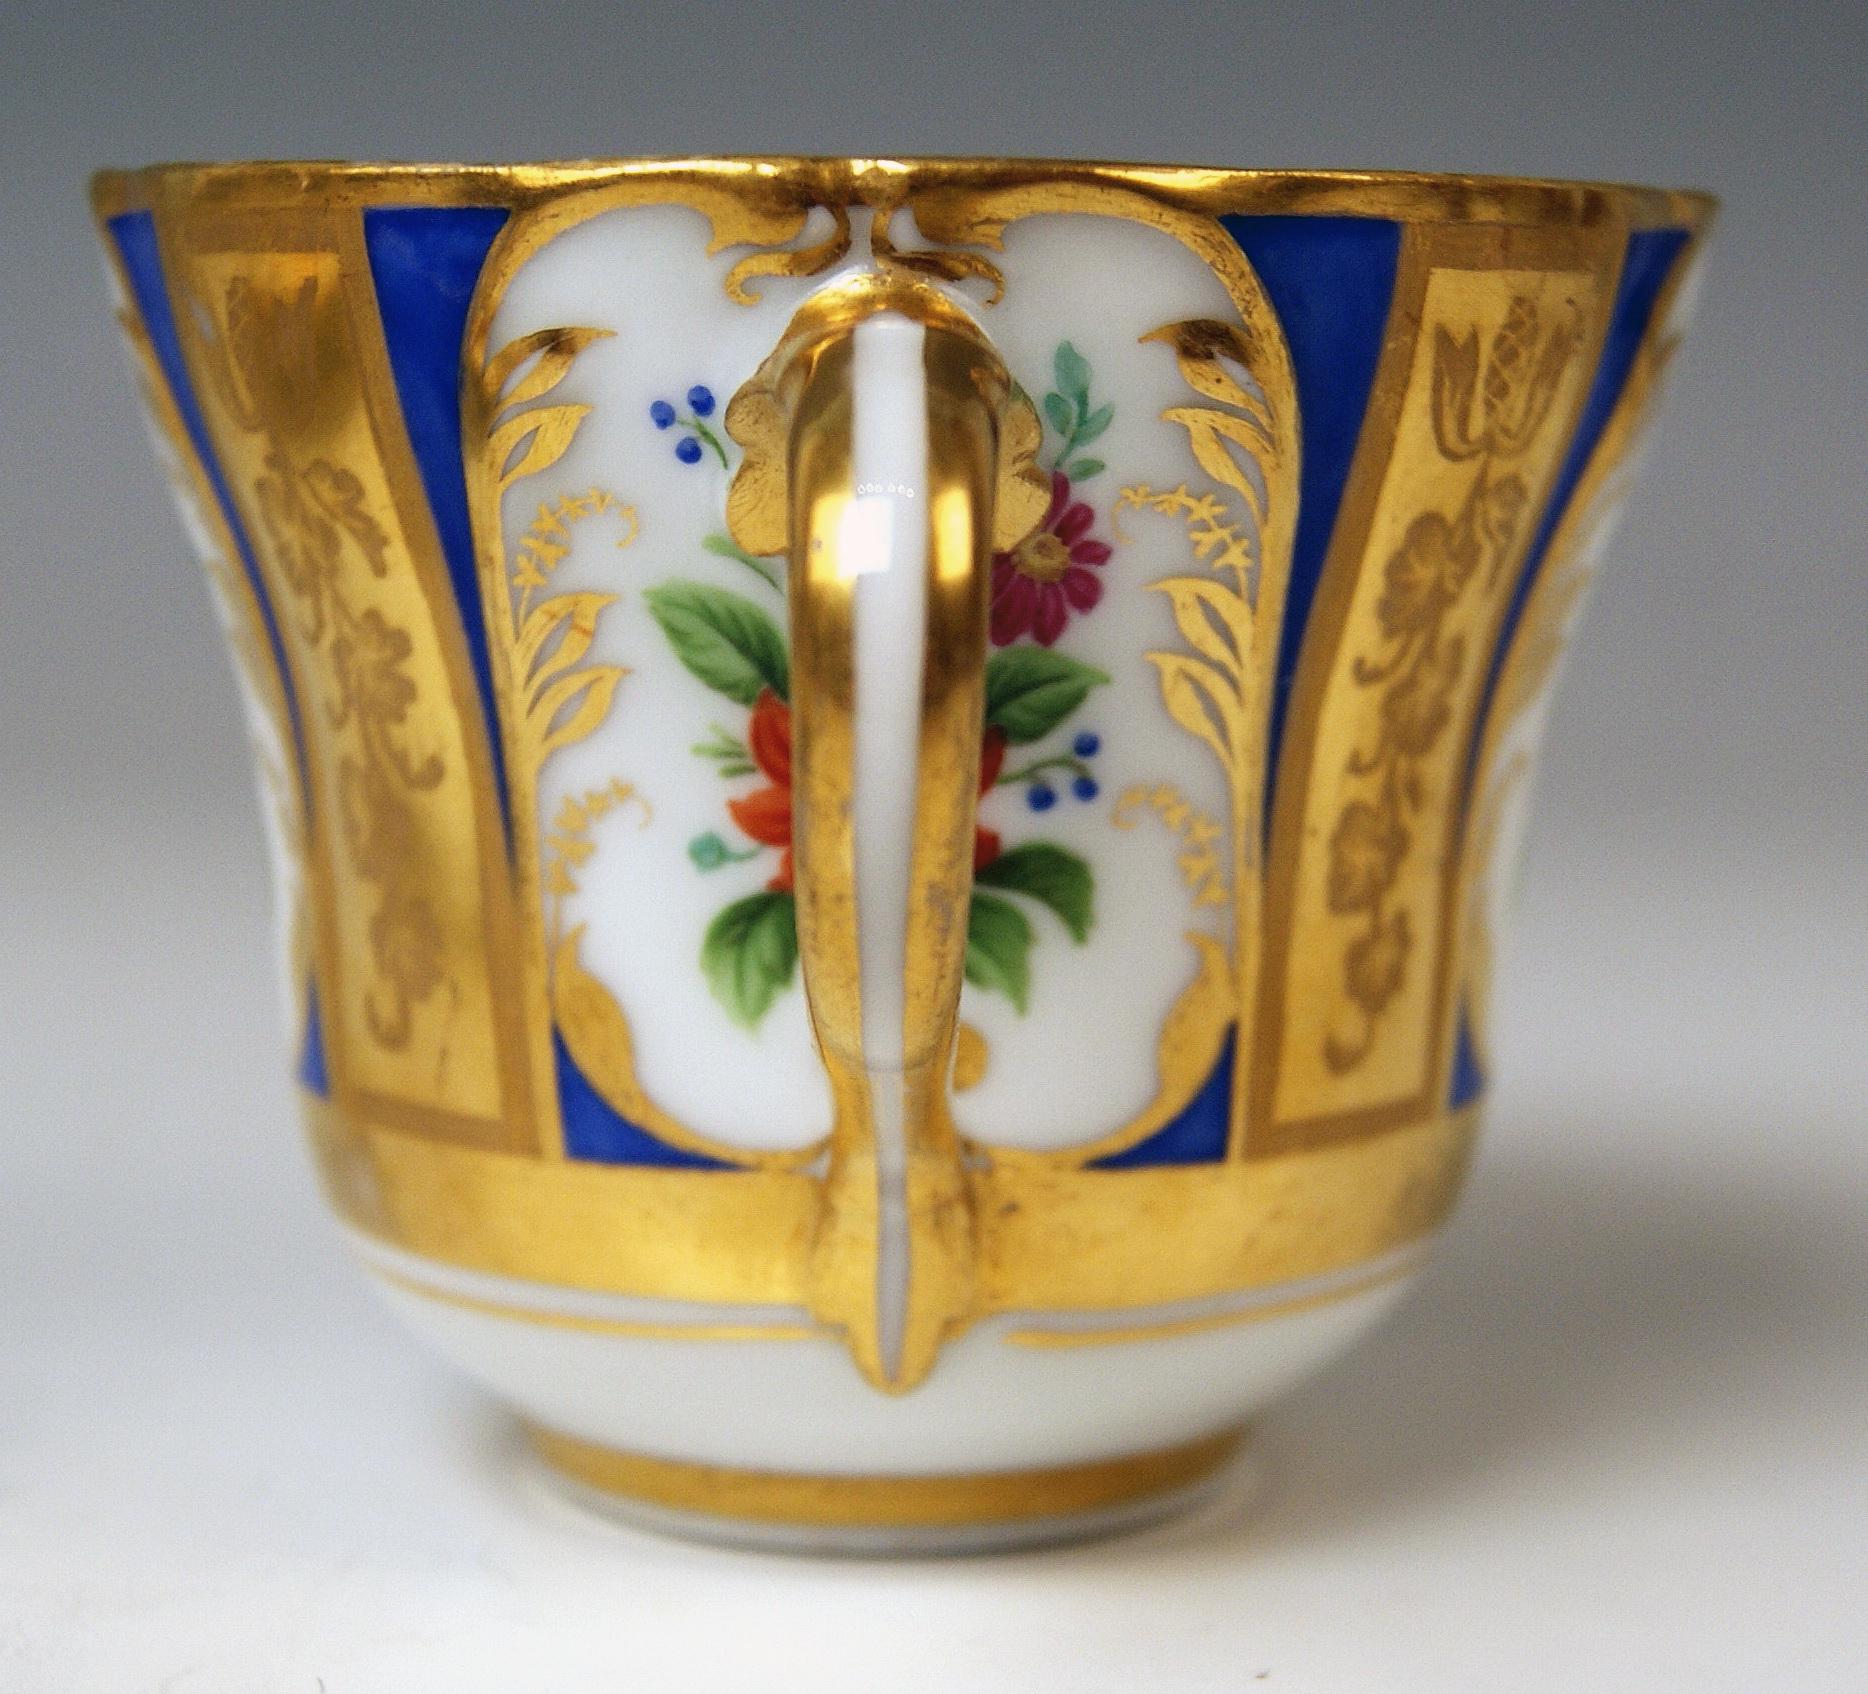 Biedermeier Vienna Imperial Porcelain Cup Saucer Painted with Flowers Golden Shaded, 1855